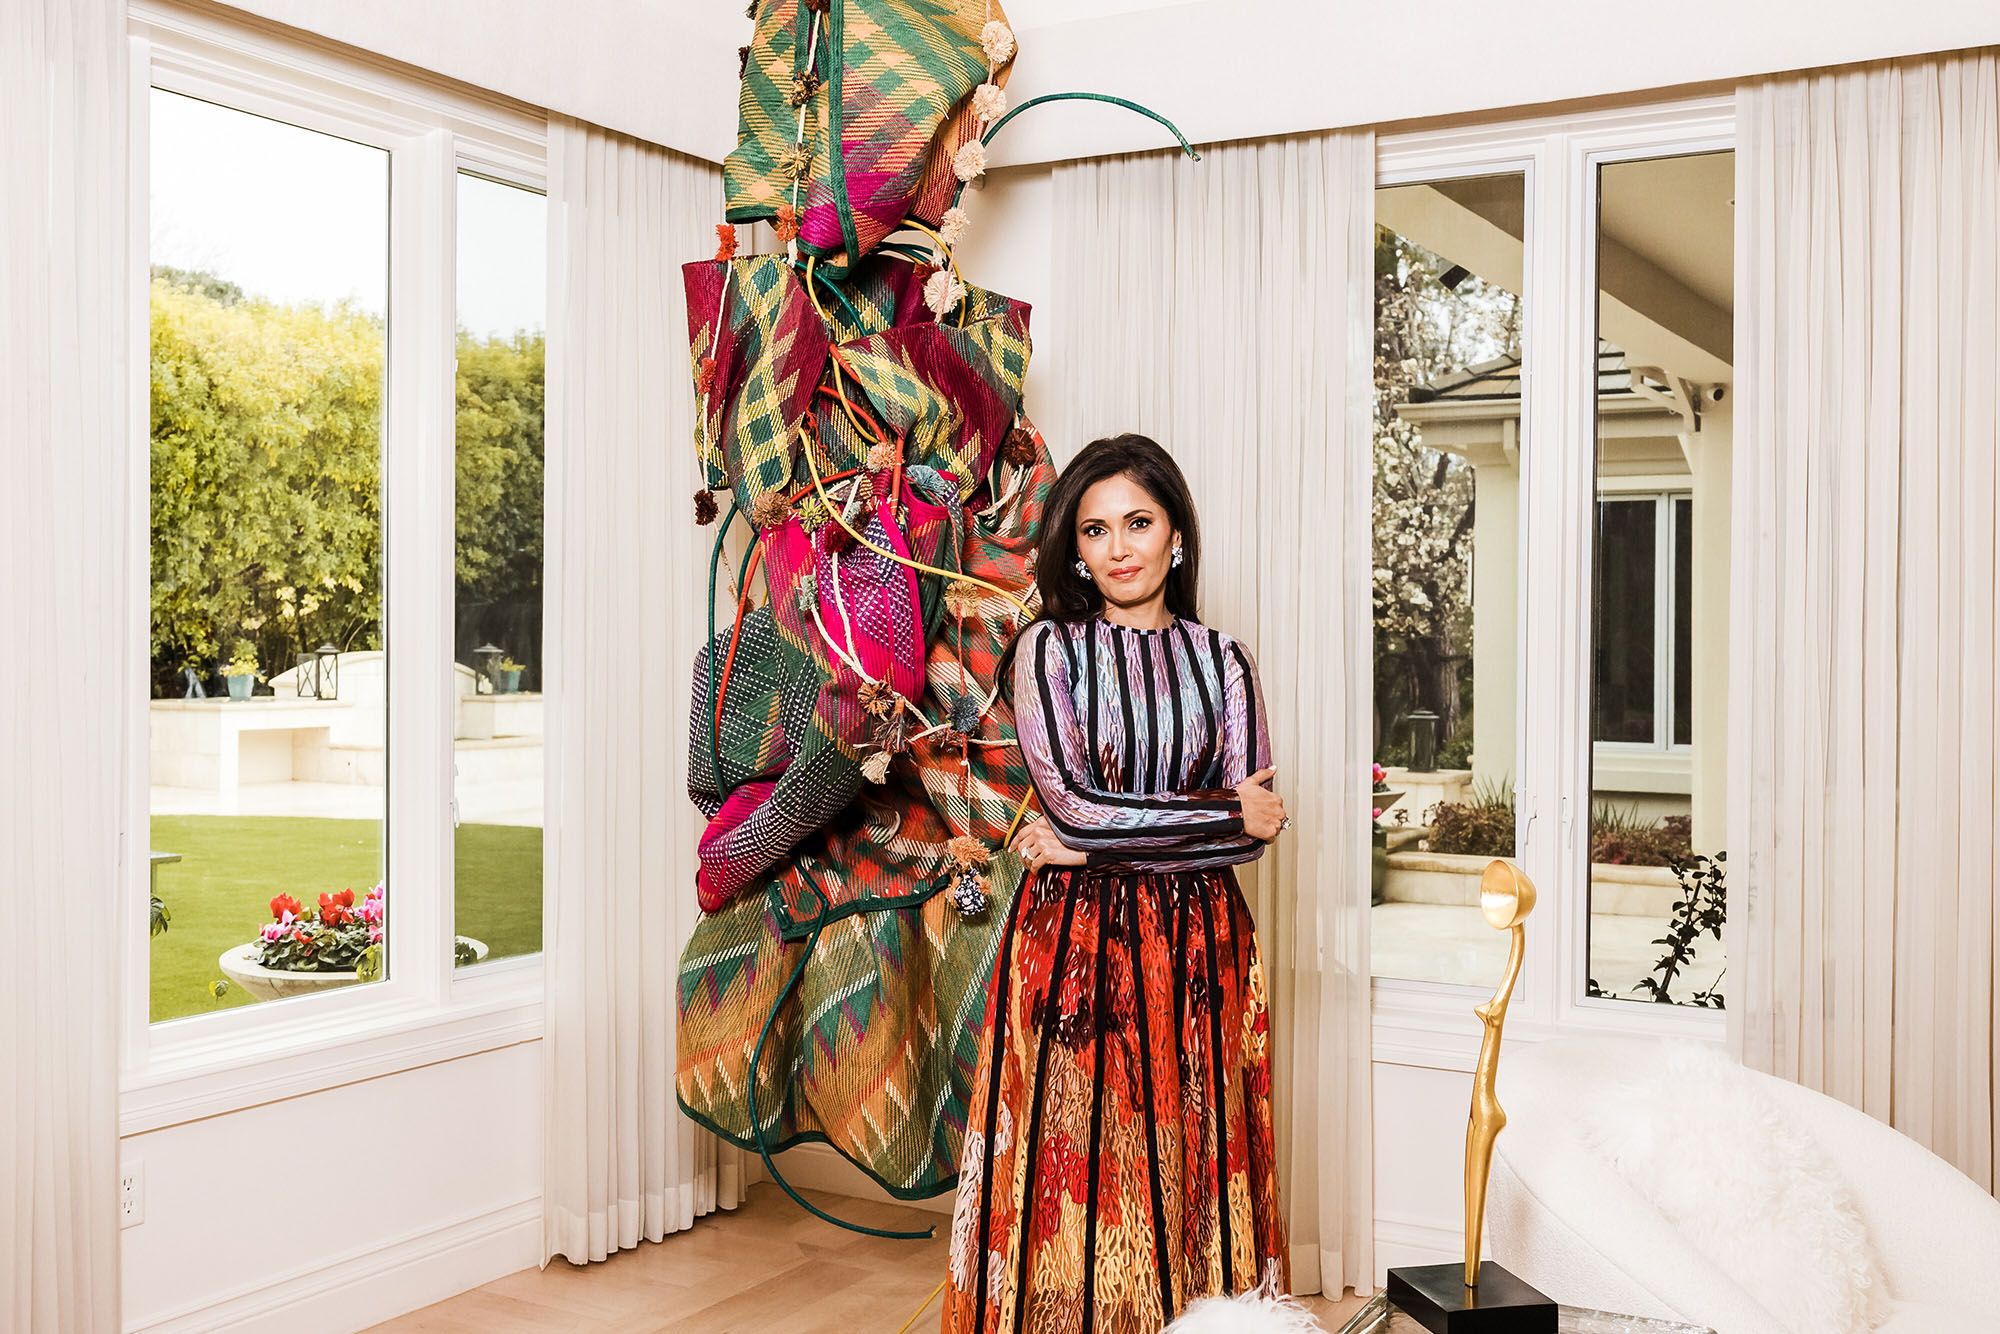 How to Live with Art, According to Collector and Advocate Komal Shah